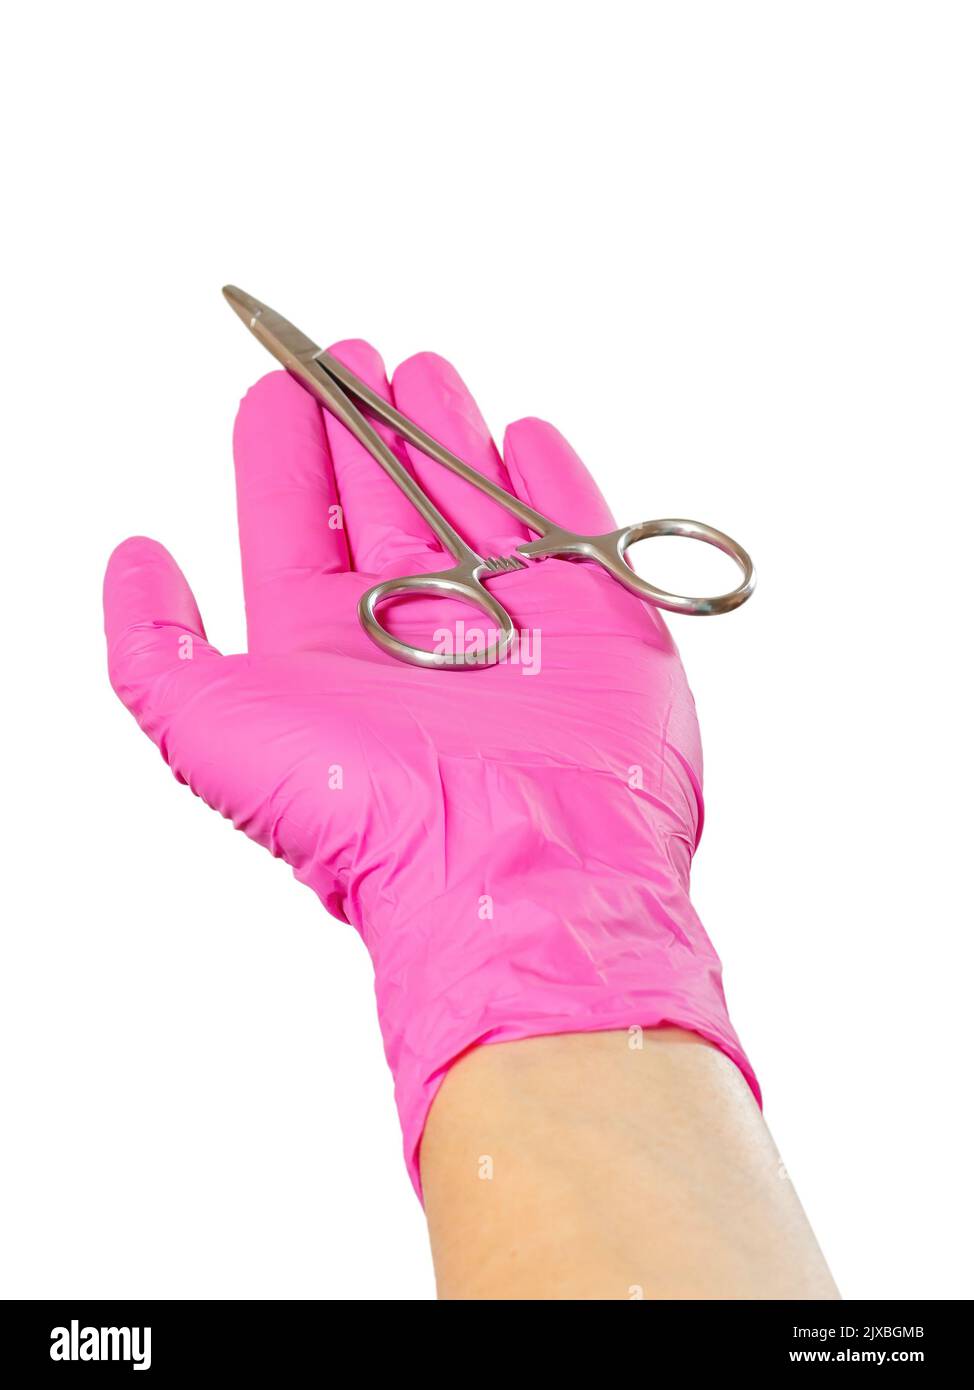 Woman's hand in a latex glove with the stainless steel needle holder on the white isolated background. Stock Photo